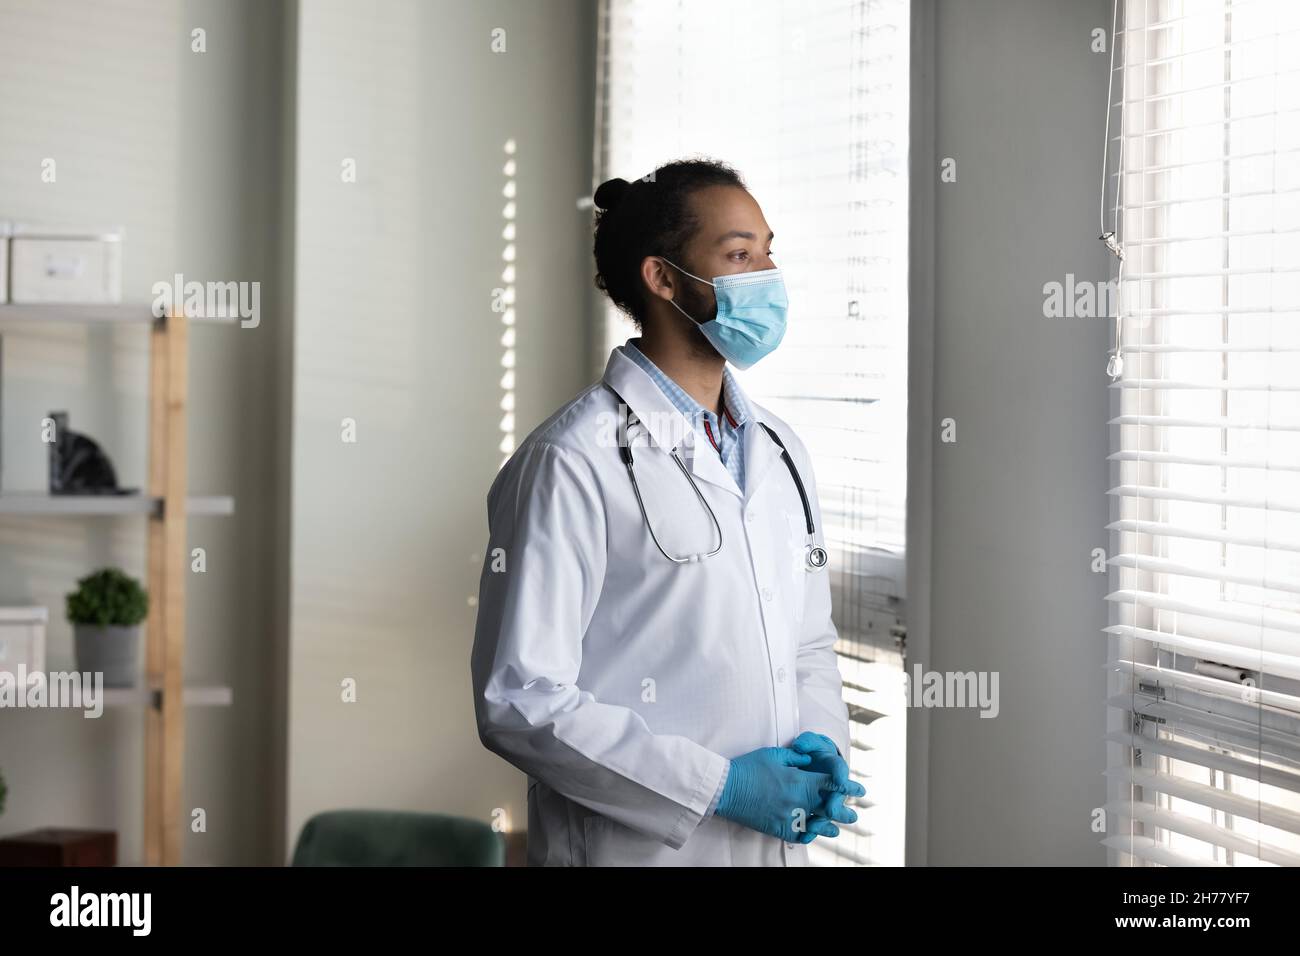 Pensive African American man doctor wearing medical mask thinking Stock Photo